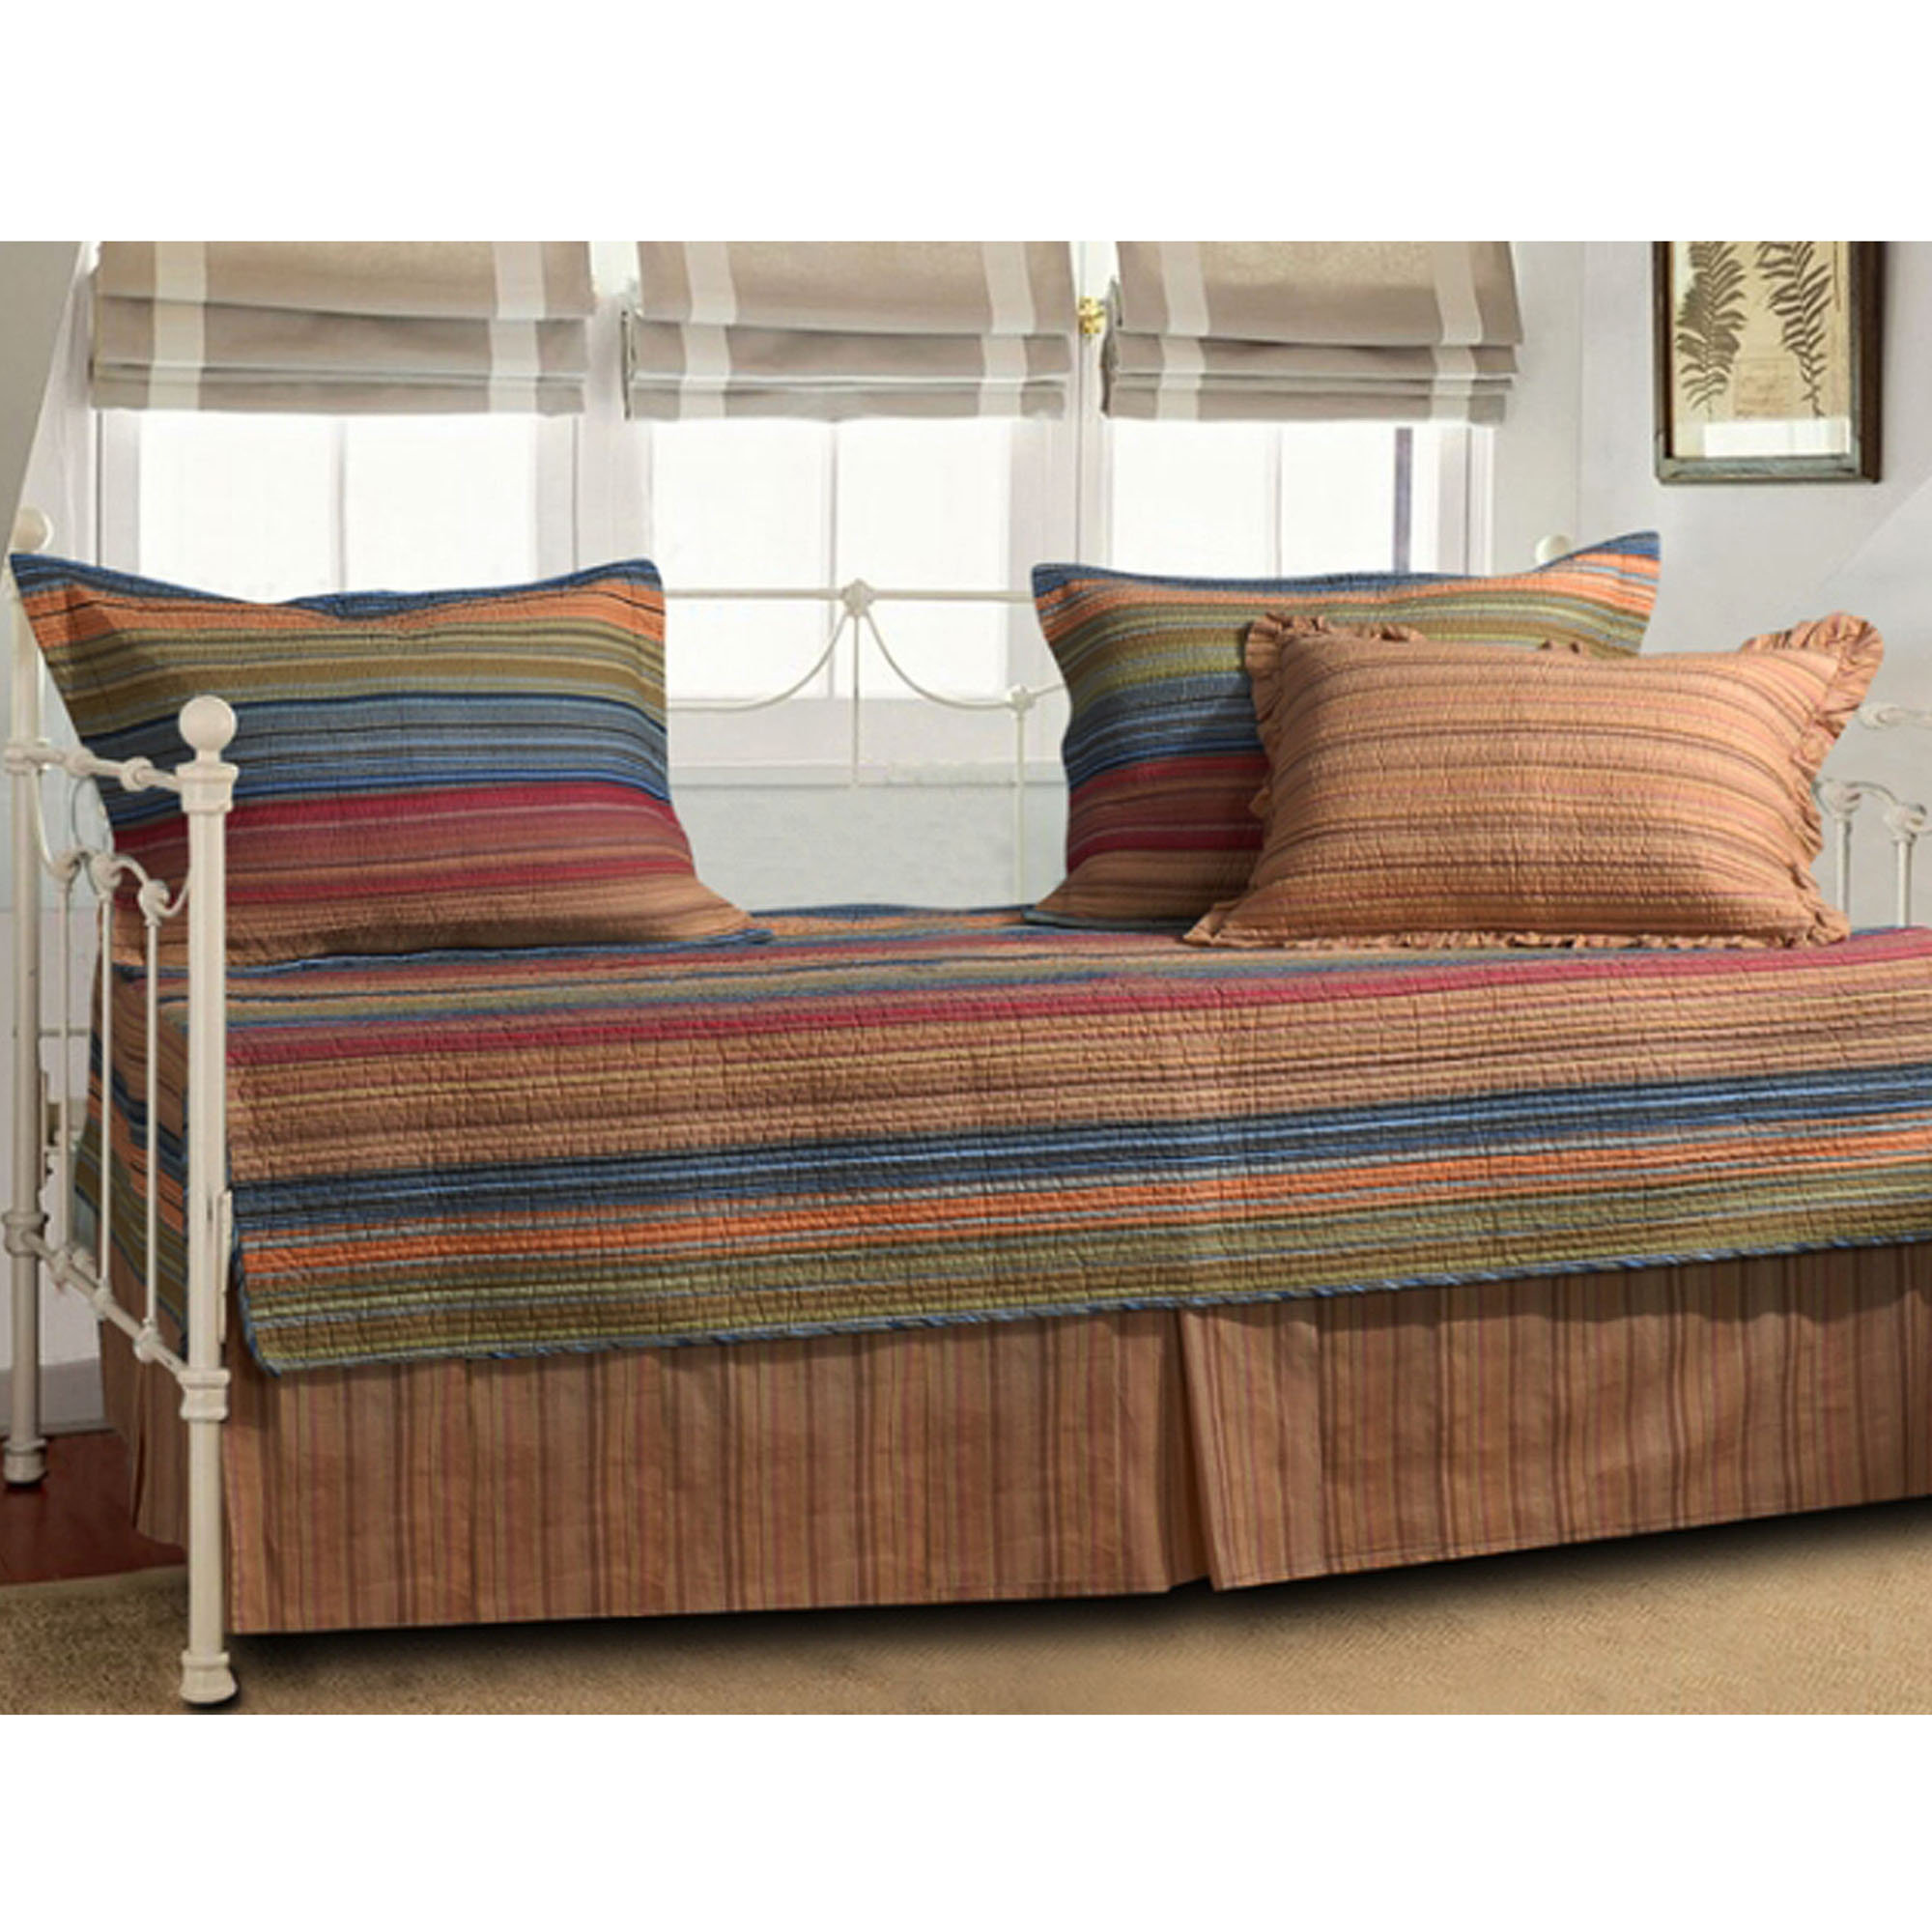 daybed set bed bath beyond photo - 6